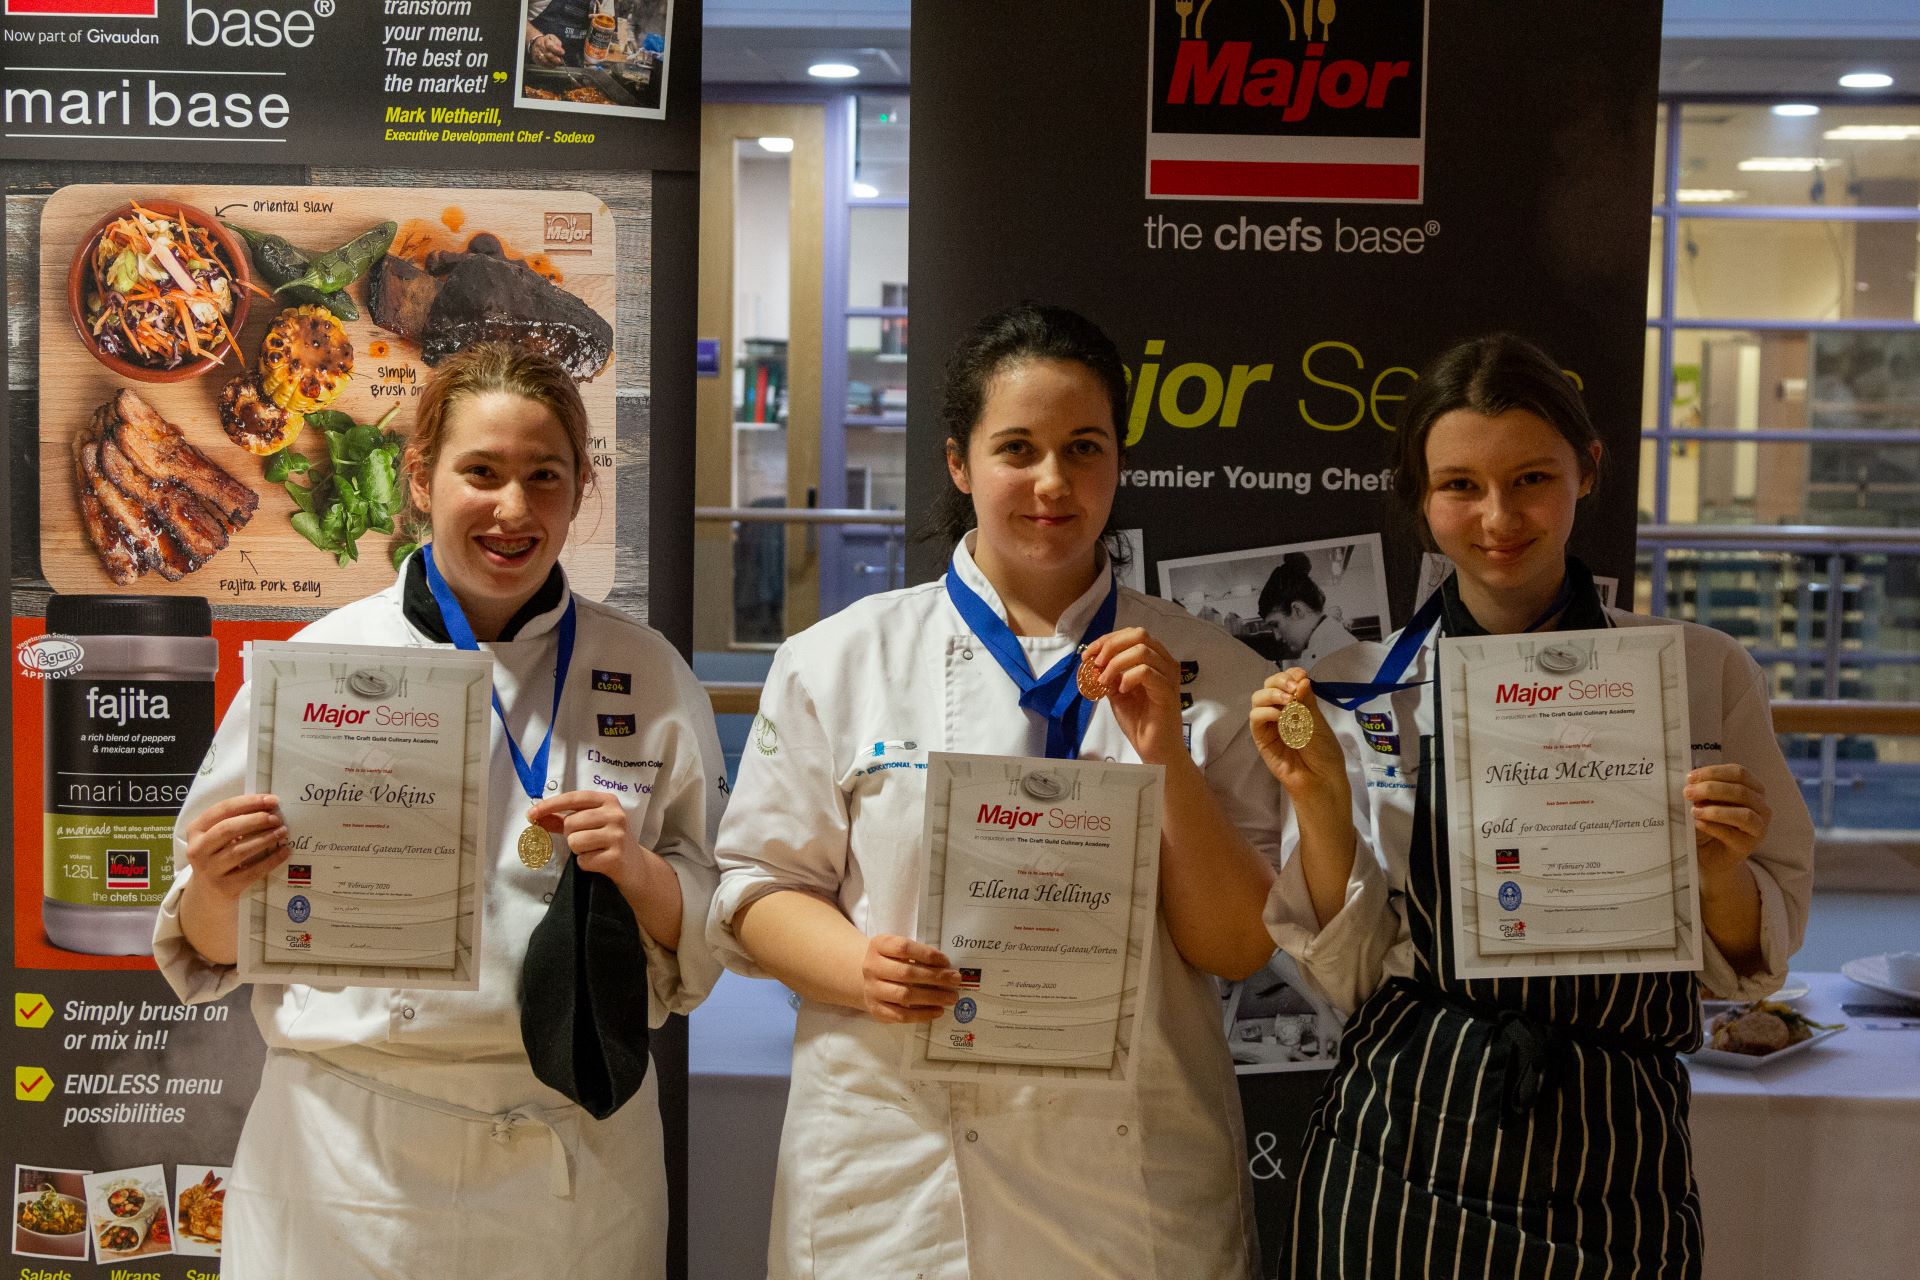 Major Series Cooking competition awards